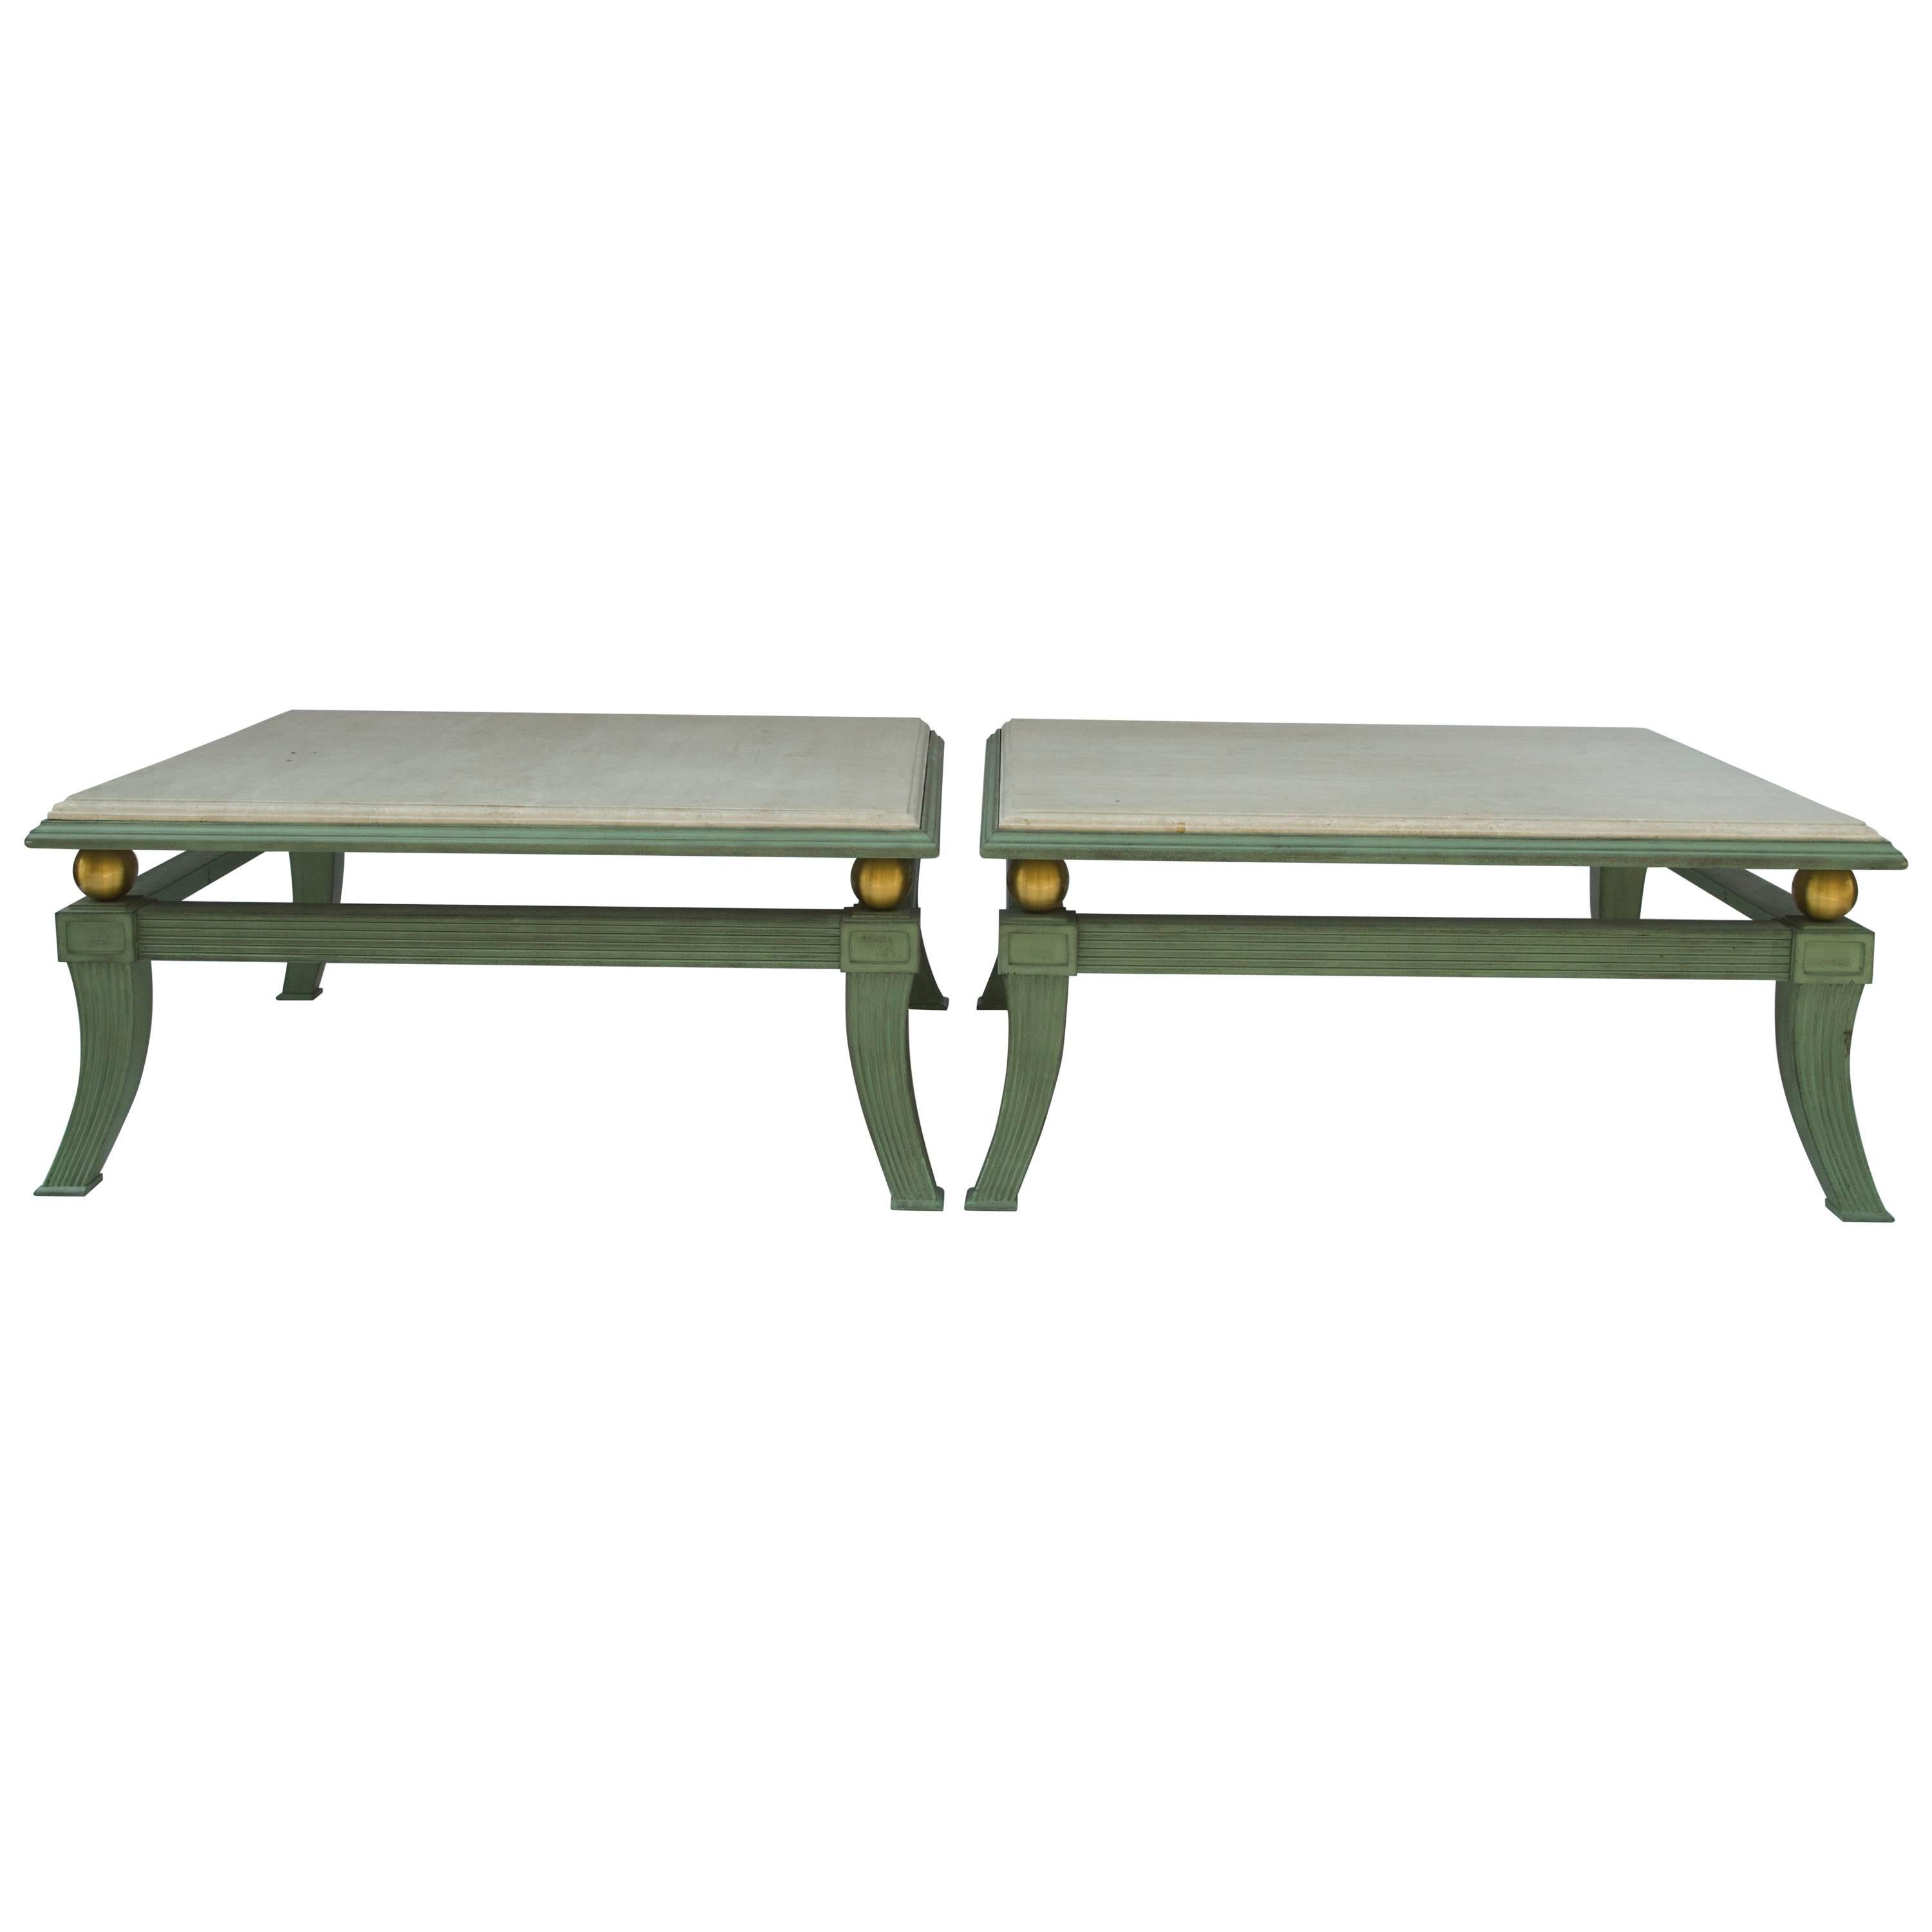 Pair of large etruscan style square coffee tables, circa 1970